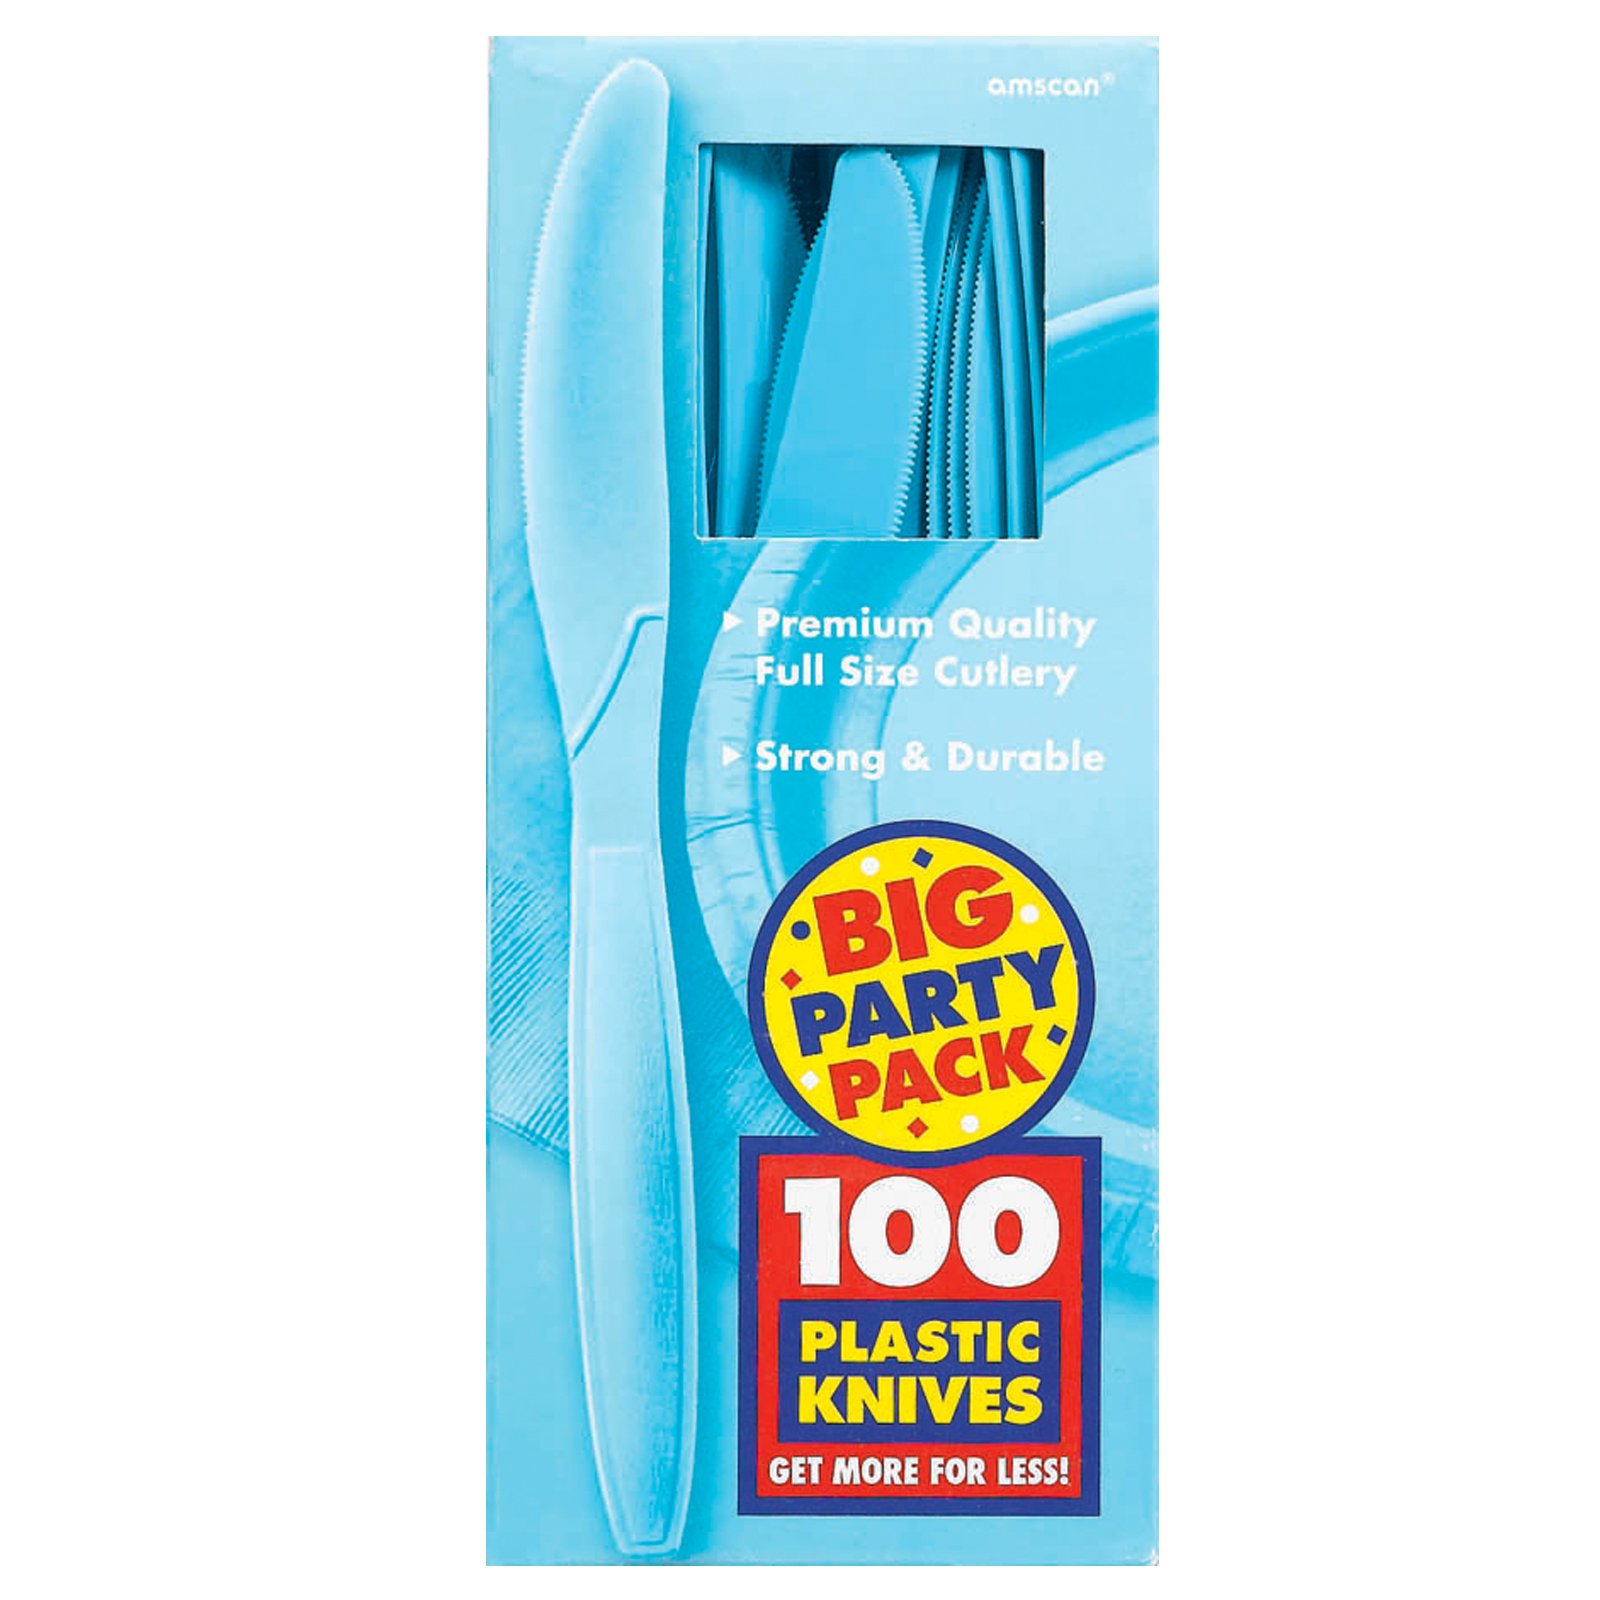 Caribbean Blue Big Party Pack - Knives (100 count)